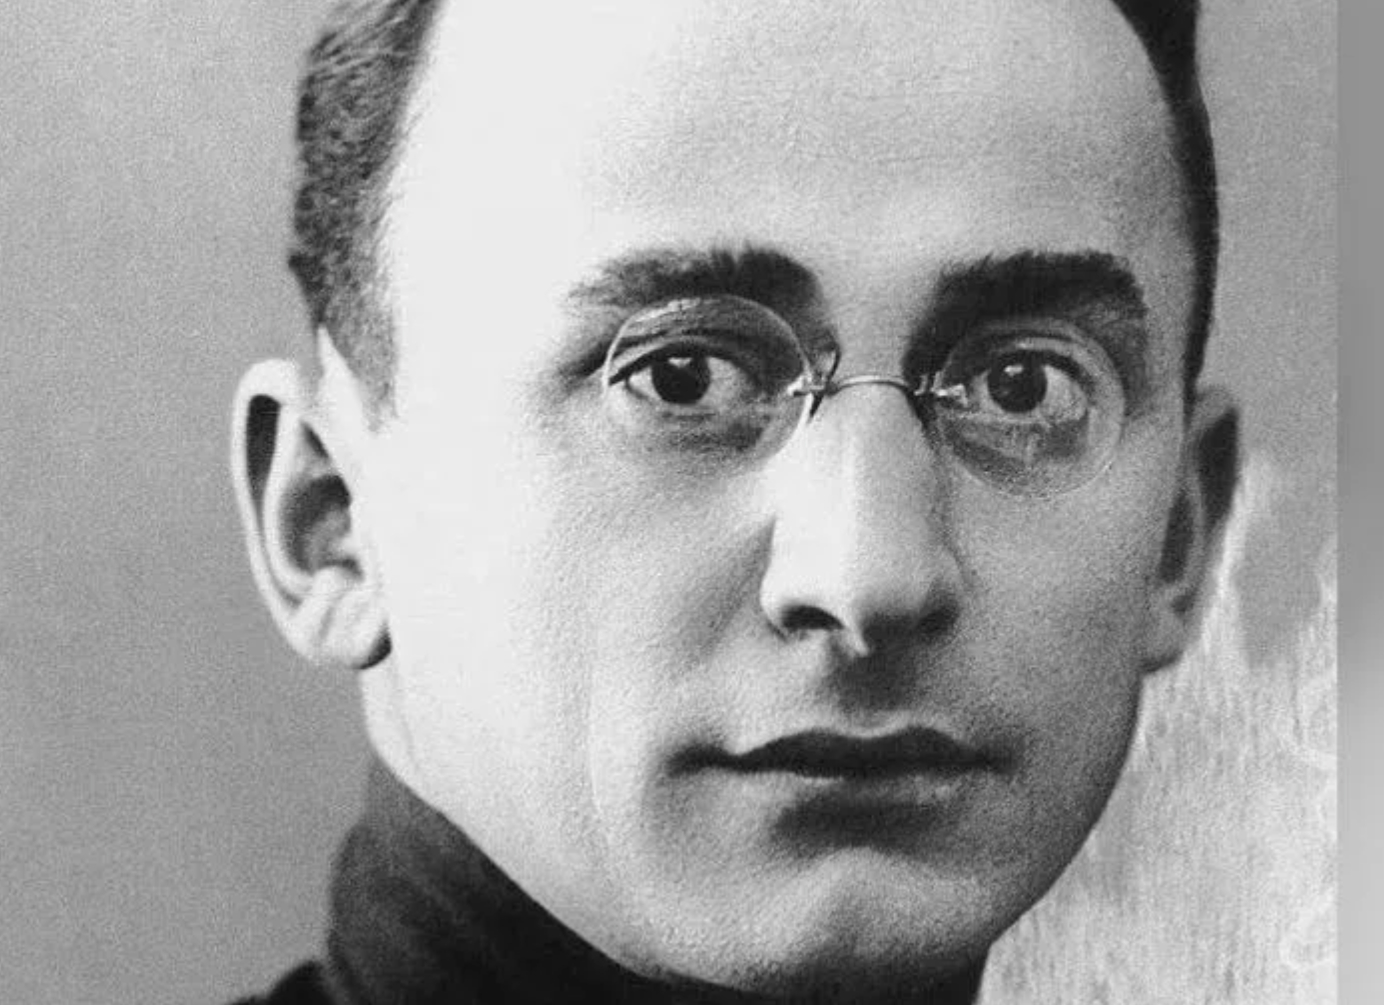 Stalin called Beria ‘our Heinrich Himmler’, referring to one of the Holocaust’s main architects